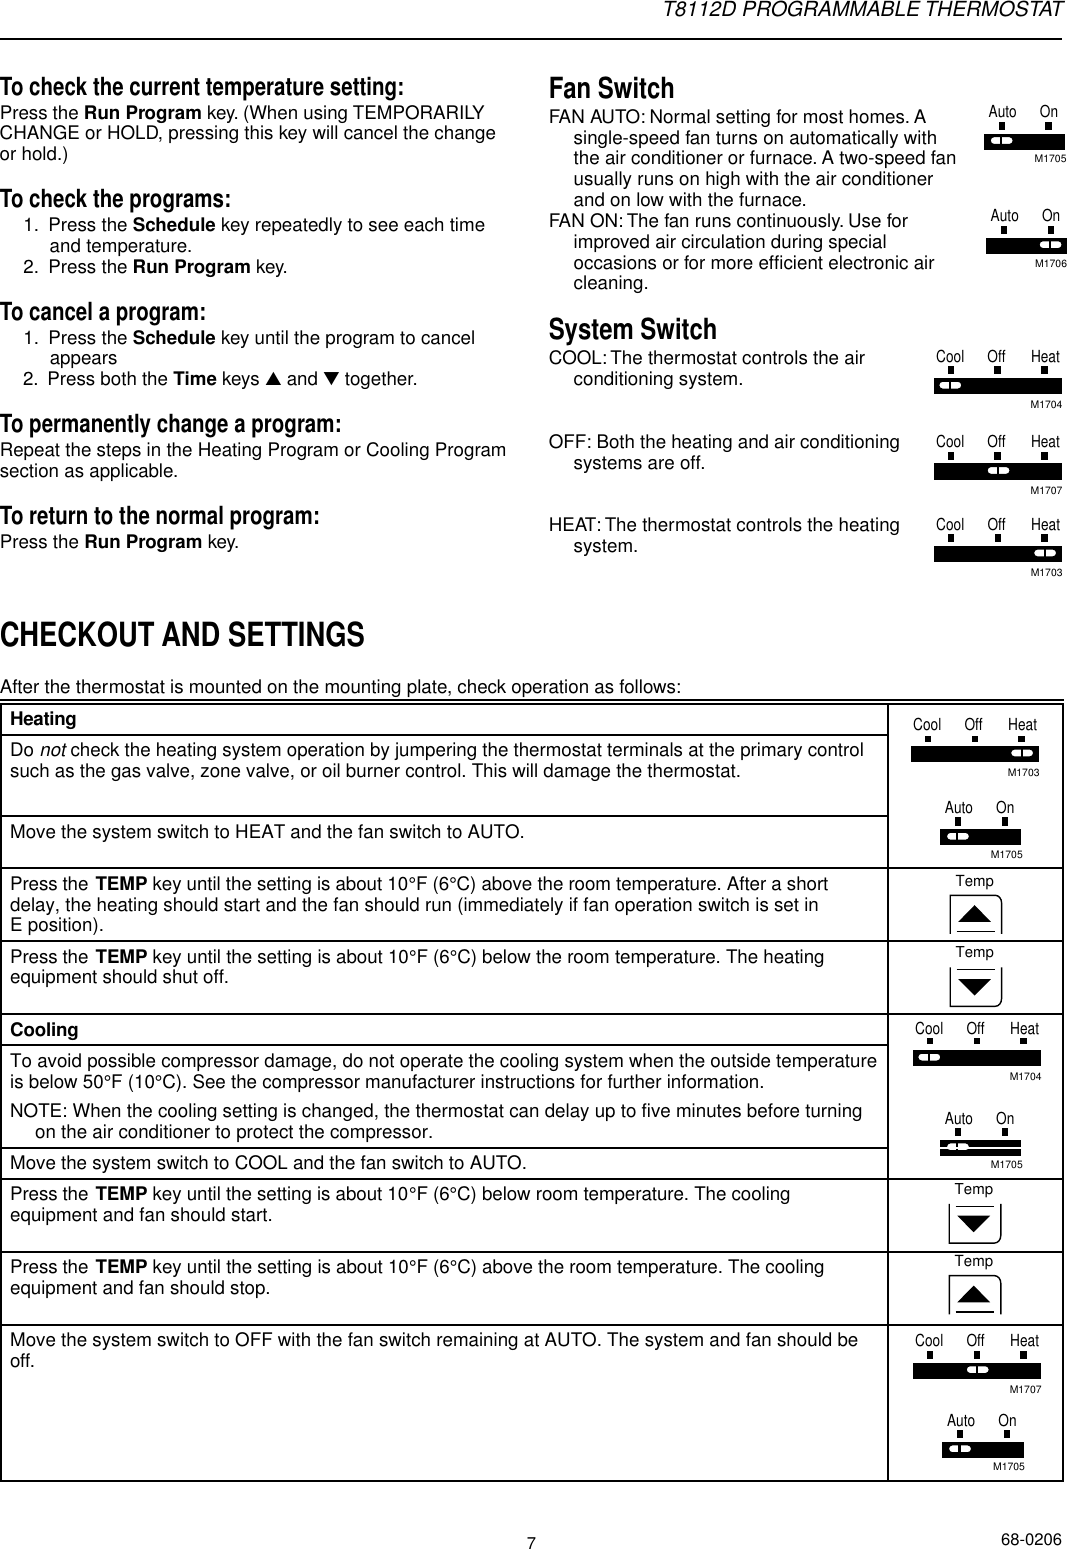 Page 7 of 8 - Honeywell Honeywell-T8112D-Owners-Manual- 68-0170 - T8112 Programmable Thermostat  Honeywell-t8112d-owners-manual